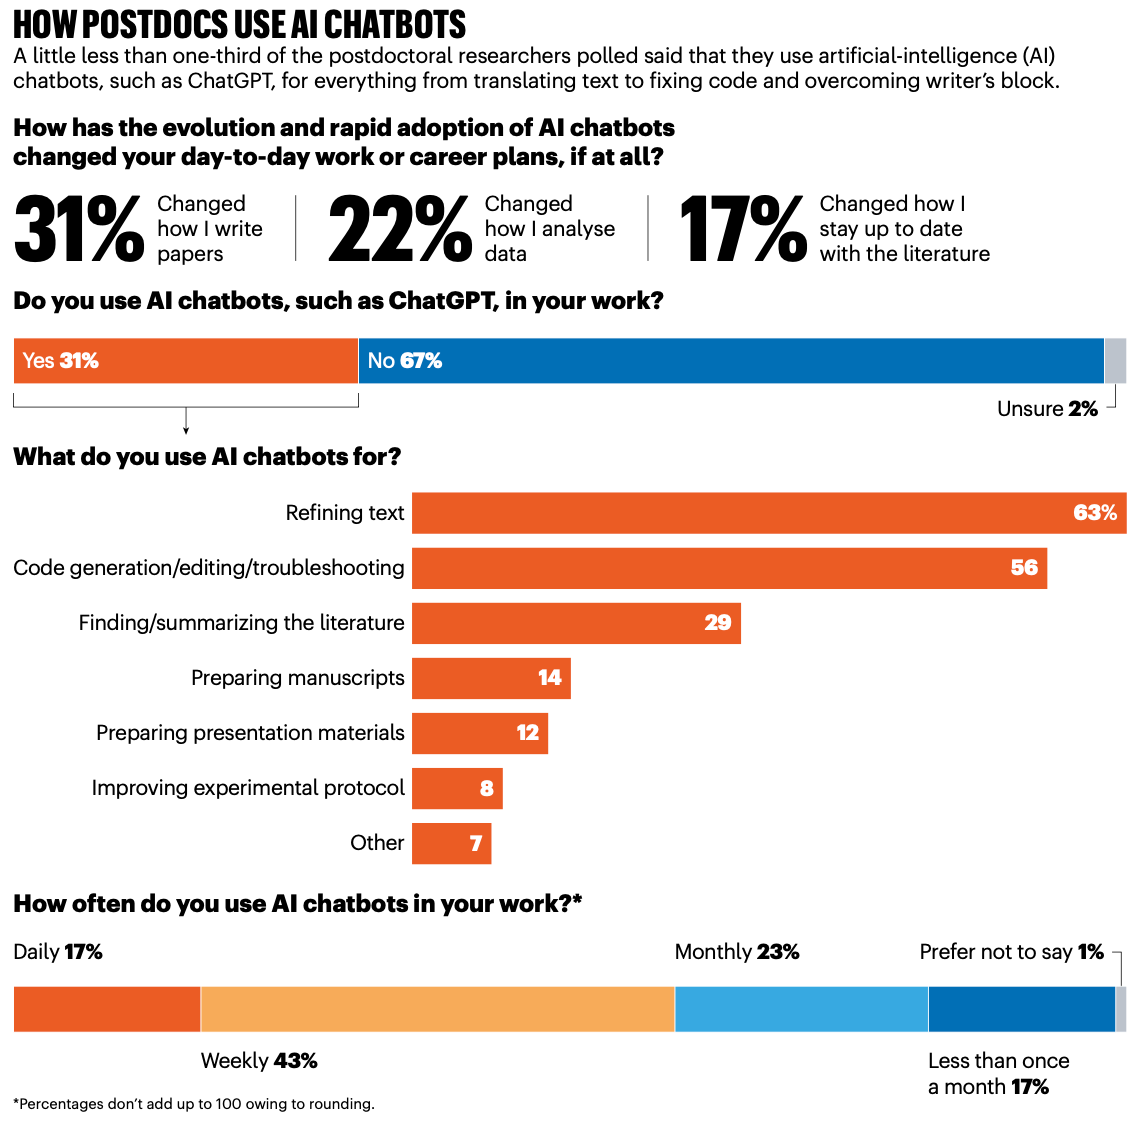 The image is an infographic titled "HOW POSTDOCS USE AI CHATBOTS". It presents statistics on the use of AI chatbots like ChatGPT among postdoctoral researchers, with various categories and percentages indicating the changes and adoption levels in their work routines.  Key details include:  A little less than one-third of postdocs polled say they use AI for tasks ranging from translating text to fixing code and overcoming writer's block.  Changes due to AI chatbots:  31% say it changed how they write papers. 22% say it changed how they analyze data. 17% say it changed how they stay up to date with the literature. Usage of AI chatbots:  31% of respondents use AI chatbots like ChatGPT in their work. 67% do not use AI chatbots. 2% are unsure. Purposes for using AI chatbots:  Refining text (63%) Code generation/editing/troubleshooting (56%) Finding/summarizing the literature (29%) Preparing manuscripts (14%) Preparing presentation materials (12%) Improving experimental protocol (8%) Other purposes (7%) Frequency of AI chatbot use:  Daily: 17% Weekly: 43% Monthly: 23% Less than once a month: 17% Prefer not to say: 1% The note at the bottom indicates that percentages don't add up to 100 due to rounding. The infographic is branded with the Nature logo, suggesting it is published or endorsed by the scientific journal or its associated companies.